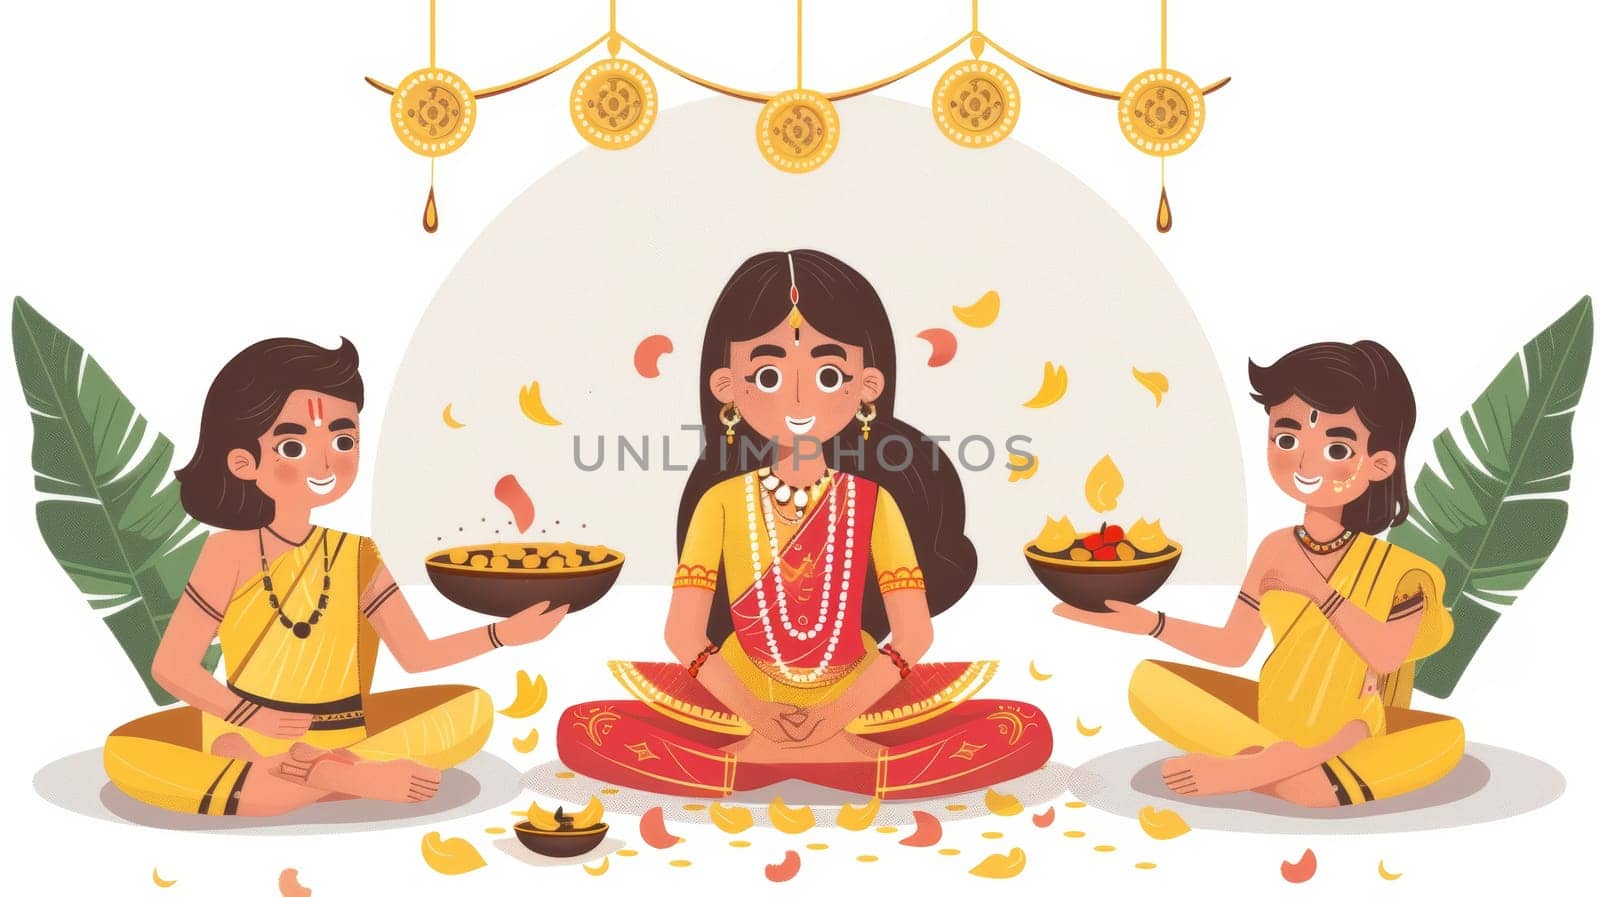 A delightful depiction of a traditional Indian ritual with children offering prayers, featuring golden hanging decorations and a backdrop of banana leaves. by sfinks